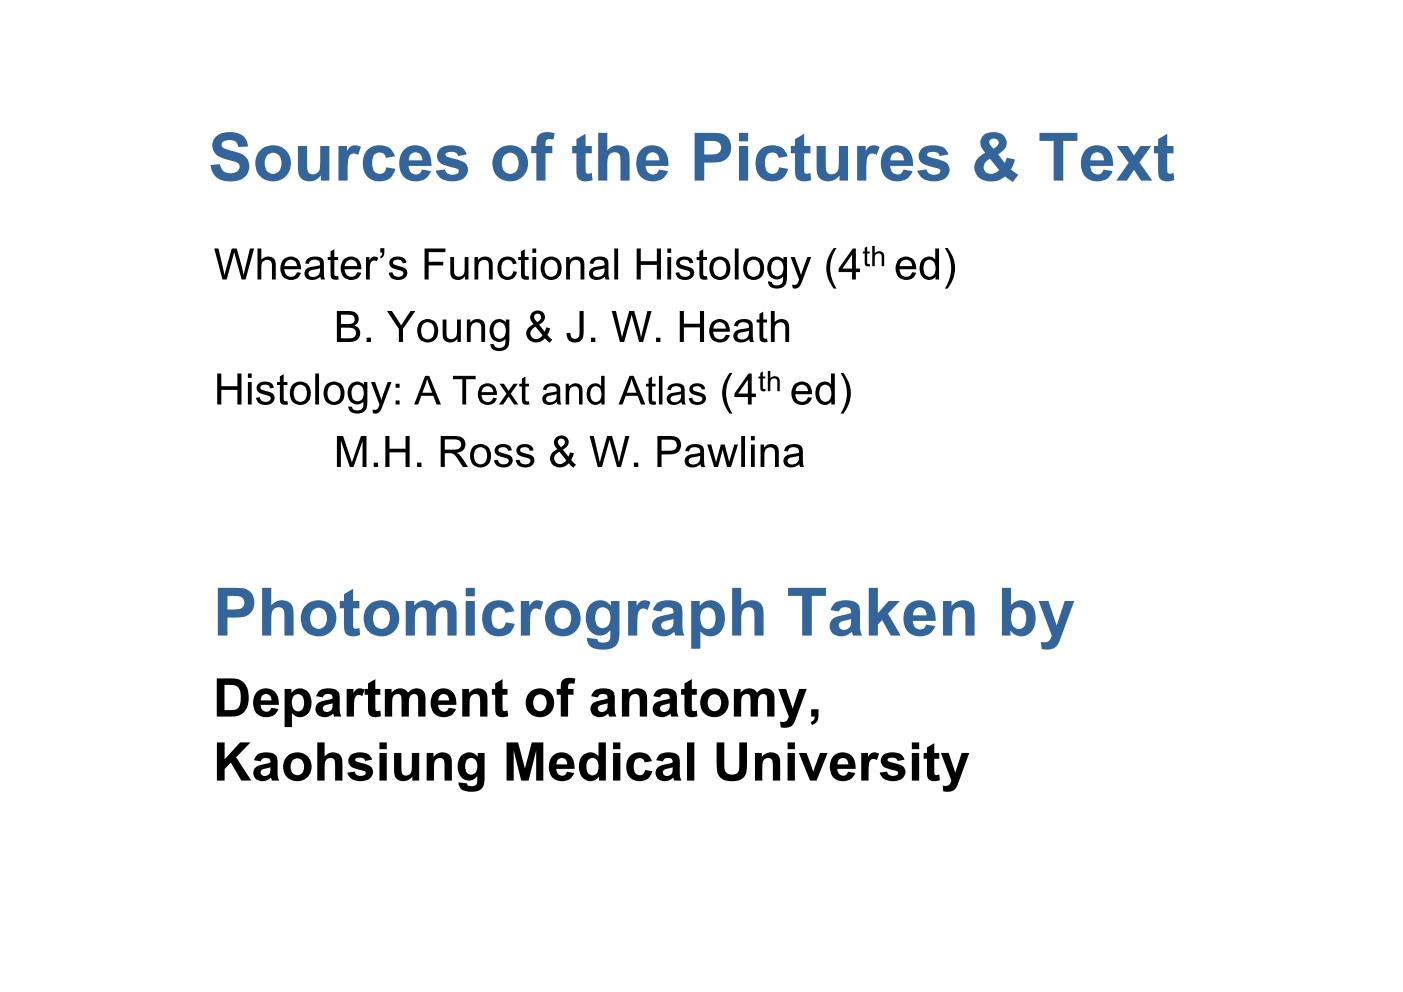 block10-1_02.jpg - Sources of the Pictures & TextWheater's Functional Histology (4th ed)      B. Young & J. W. HeathHistology: A Text and Atlas (4th ed)      M.H. Ross & W. PawlinaPhotomicrograph Taken byDepartment of anatomy,Kaohsiung Medical University